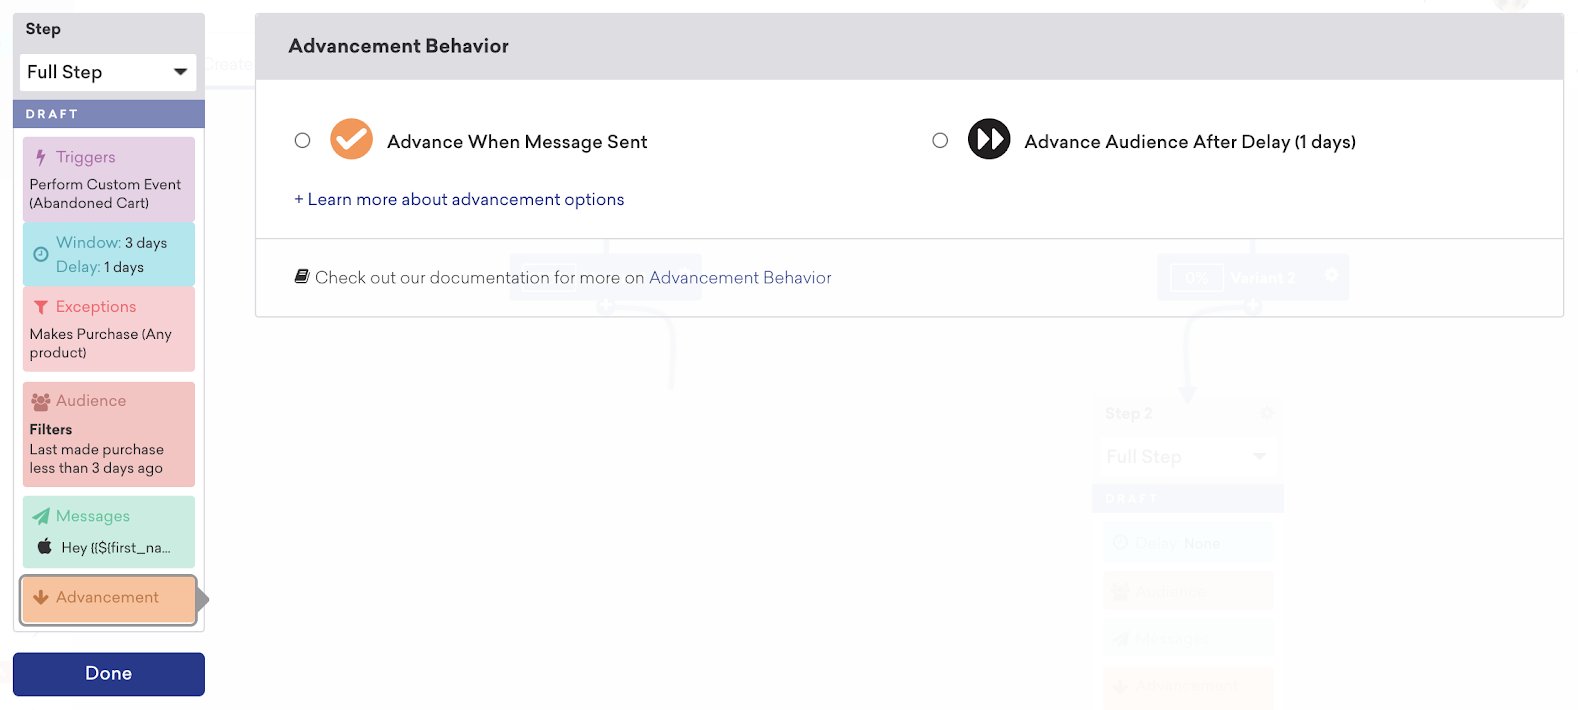 Advancement Behavior options for a Canvas Step with the option to advance the users when the message is sent or to advance the audience after a delay time of one day.